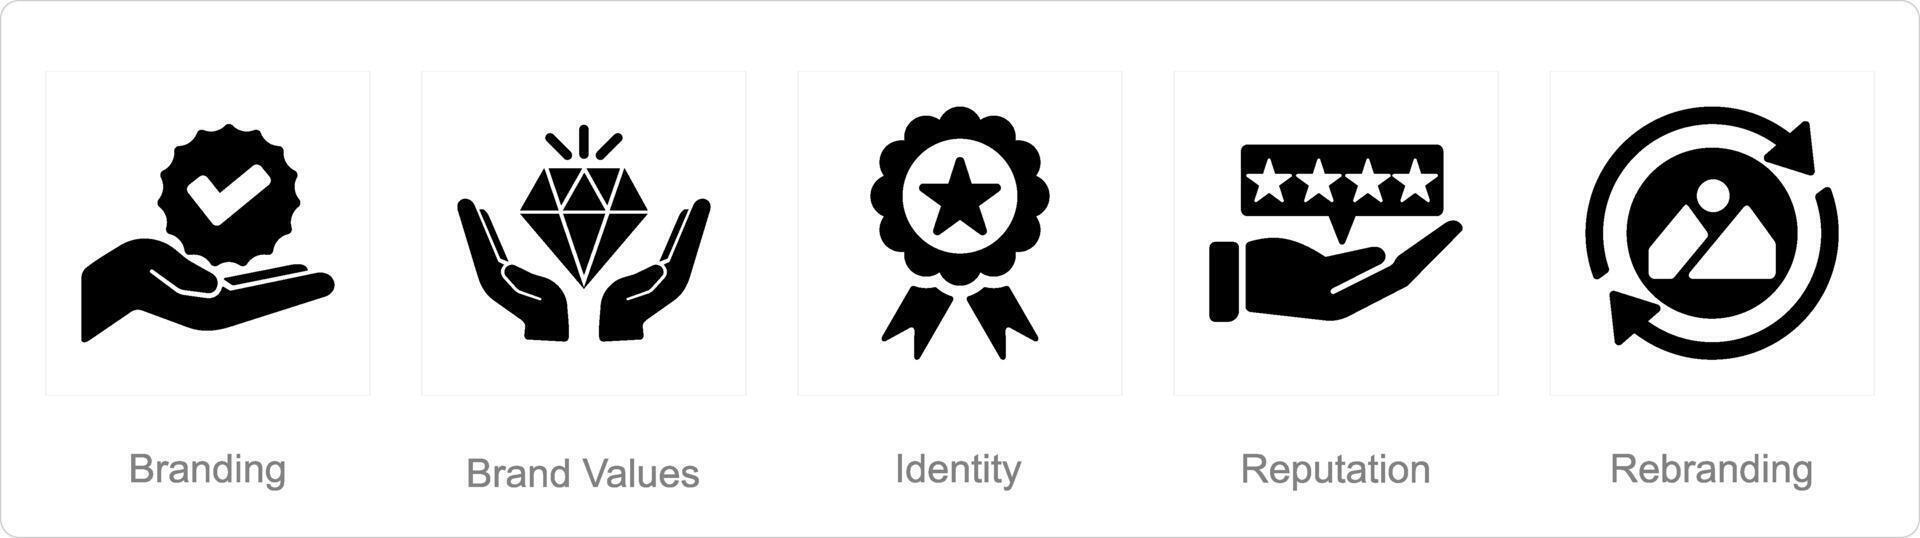 A set of 5 Branding icons as branding, brand values, identity vector